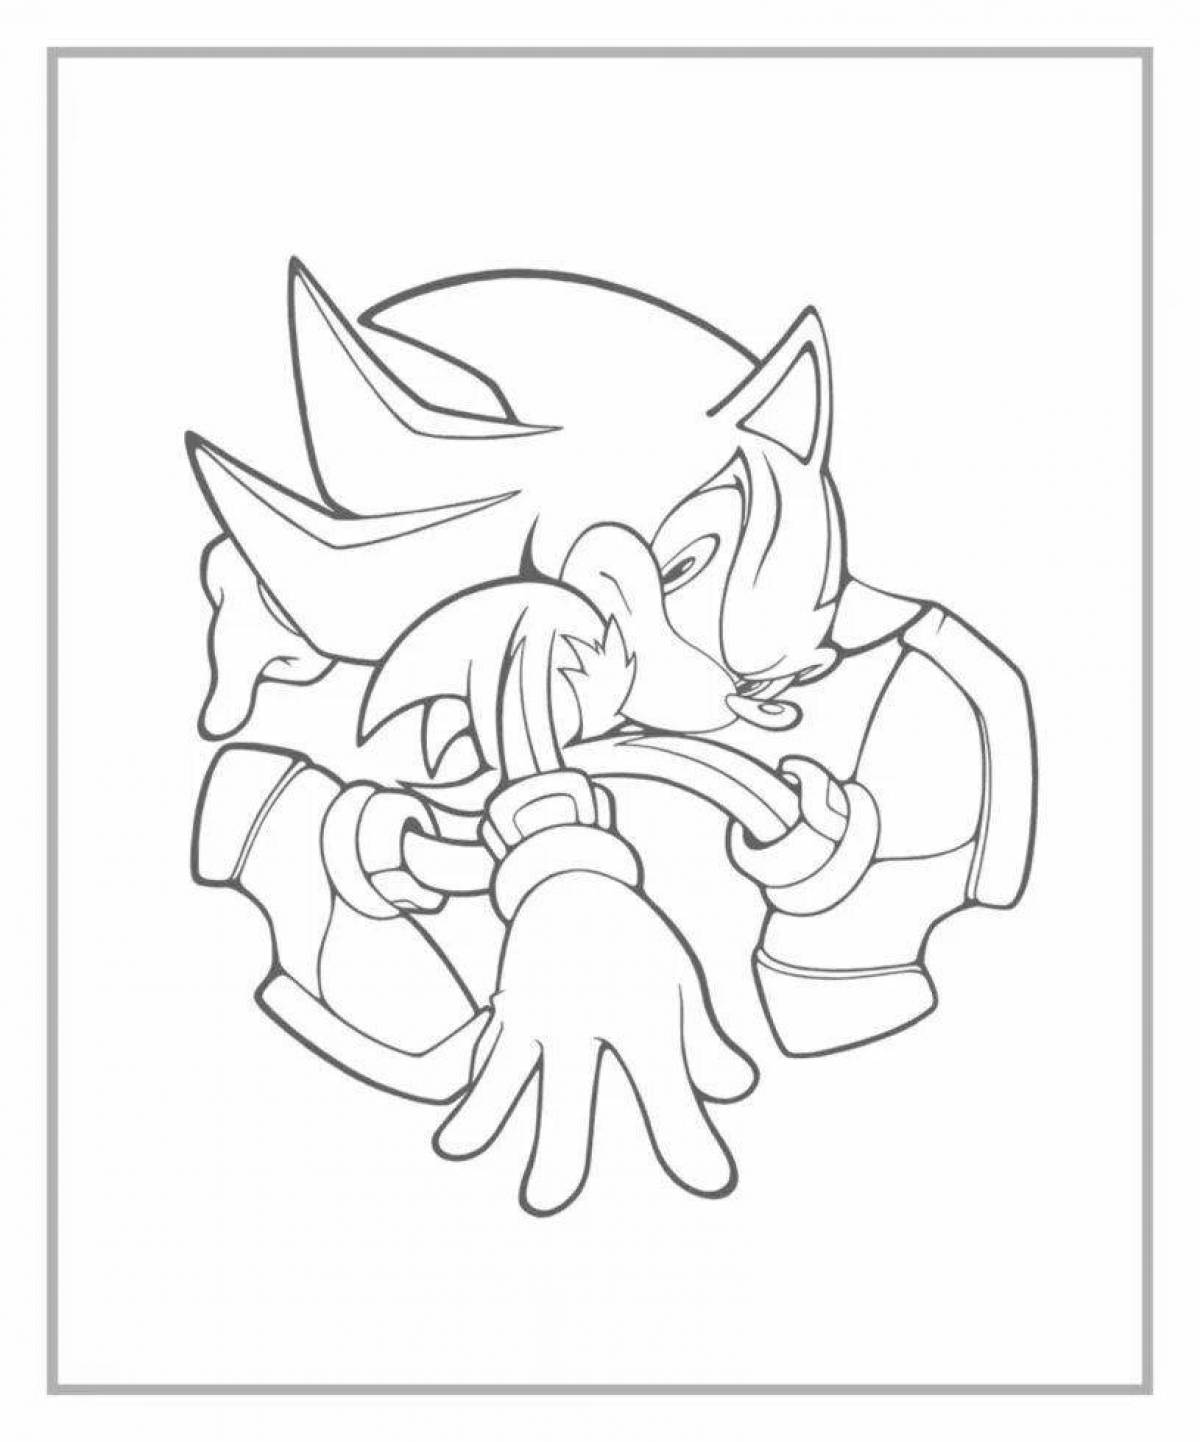 Exquisite shadow coloring page